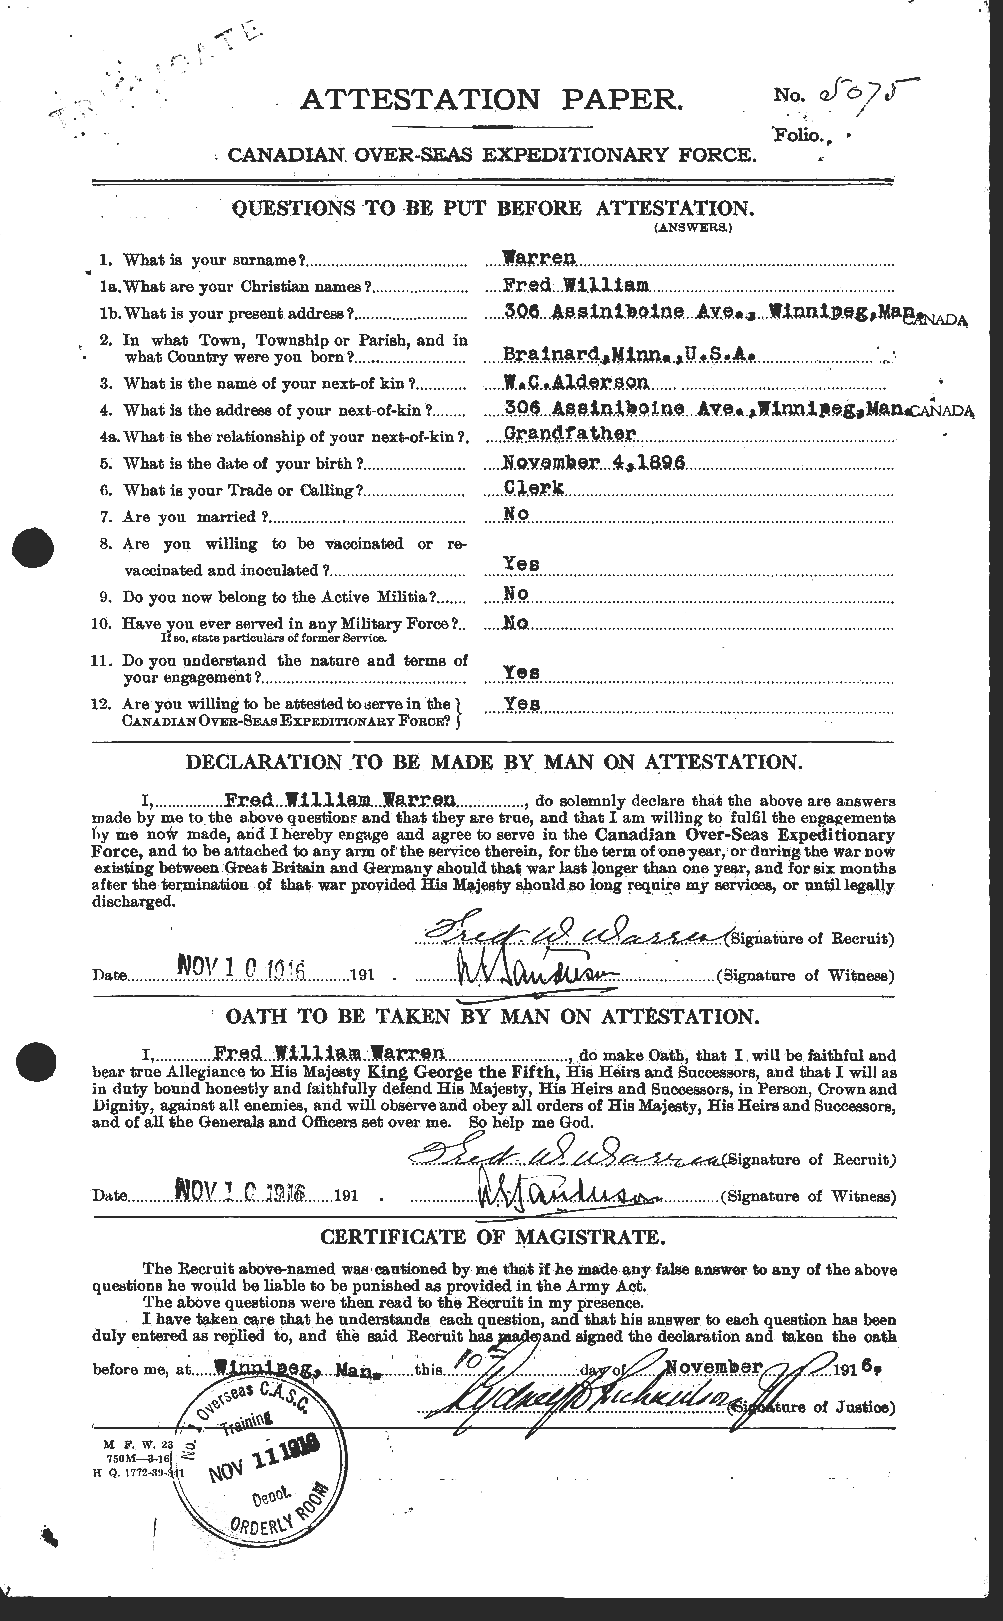 Personnel Records of the First World War - CEF 658440a